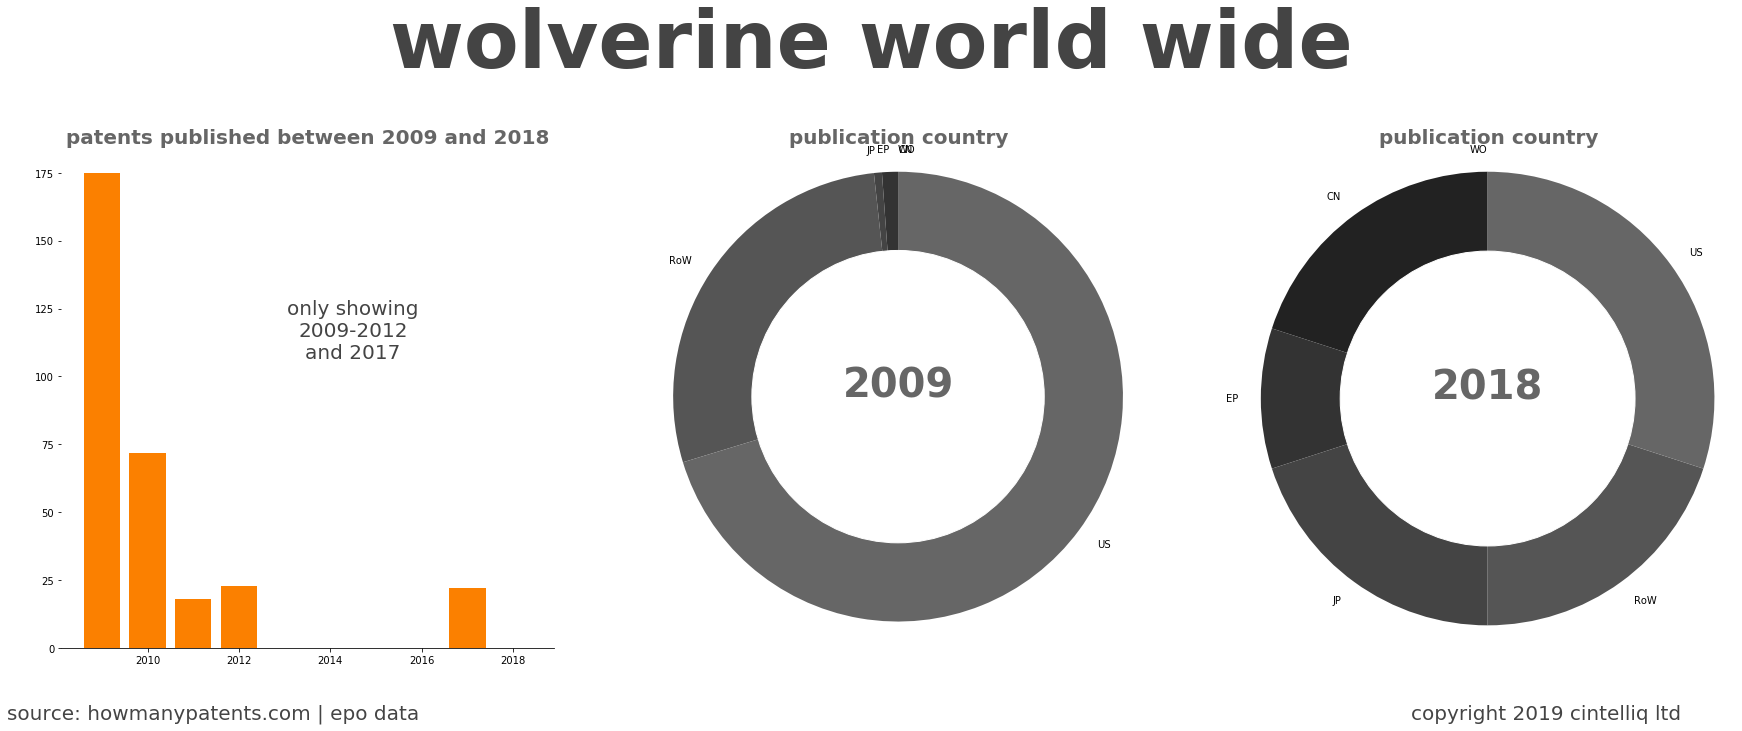 summary of patents for Wolverine World Wide